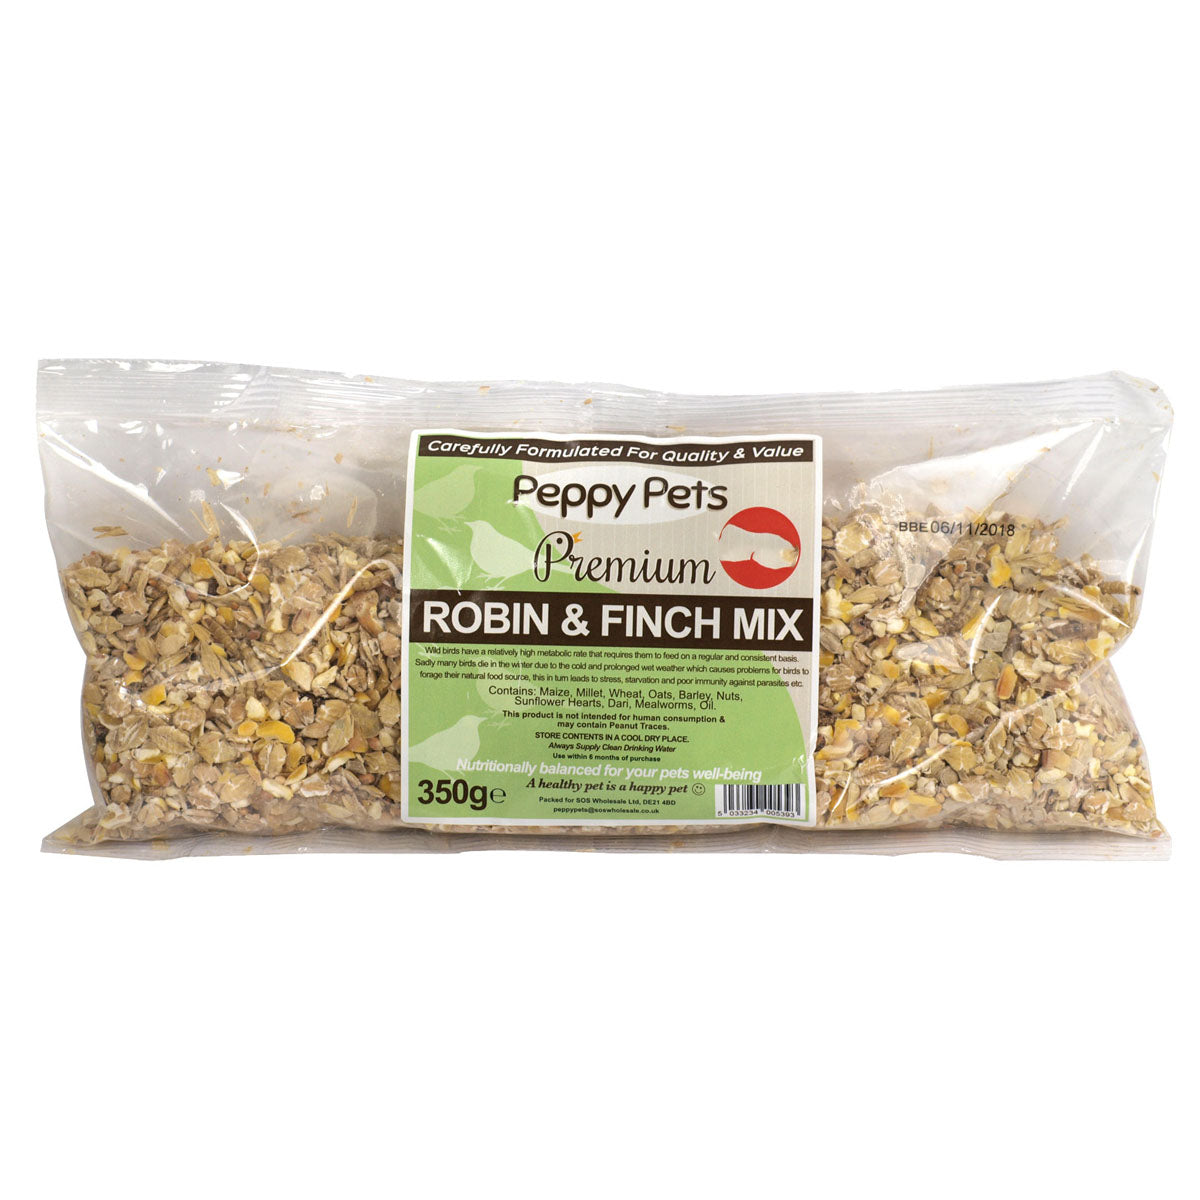 A bag of Peppy Pets - Robin & Finch Mix - 350g.